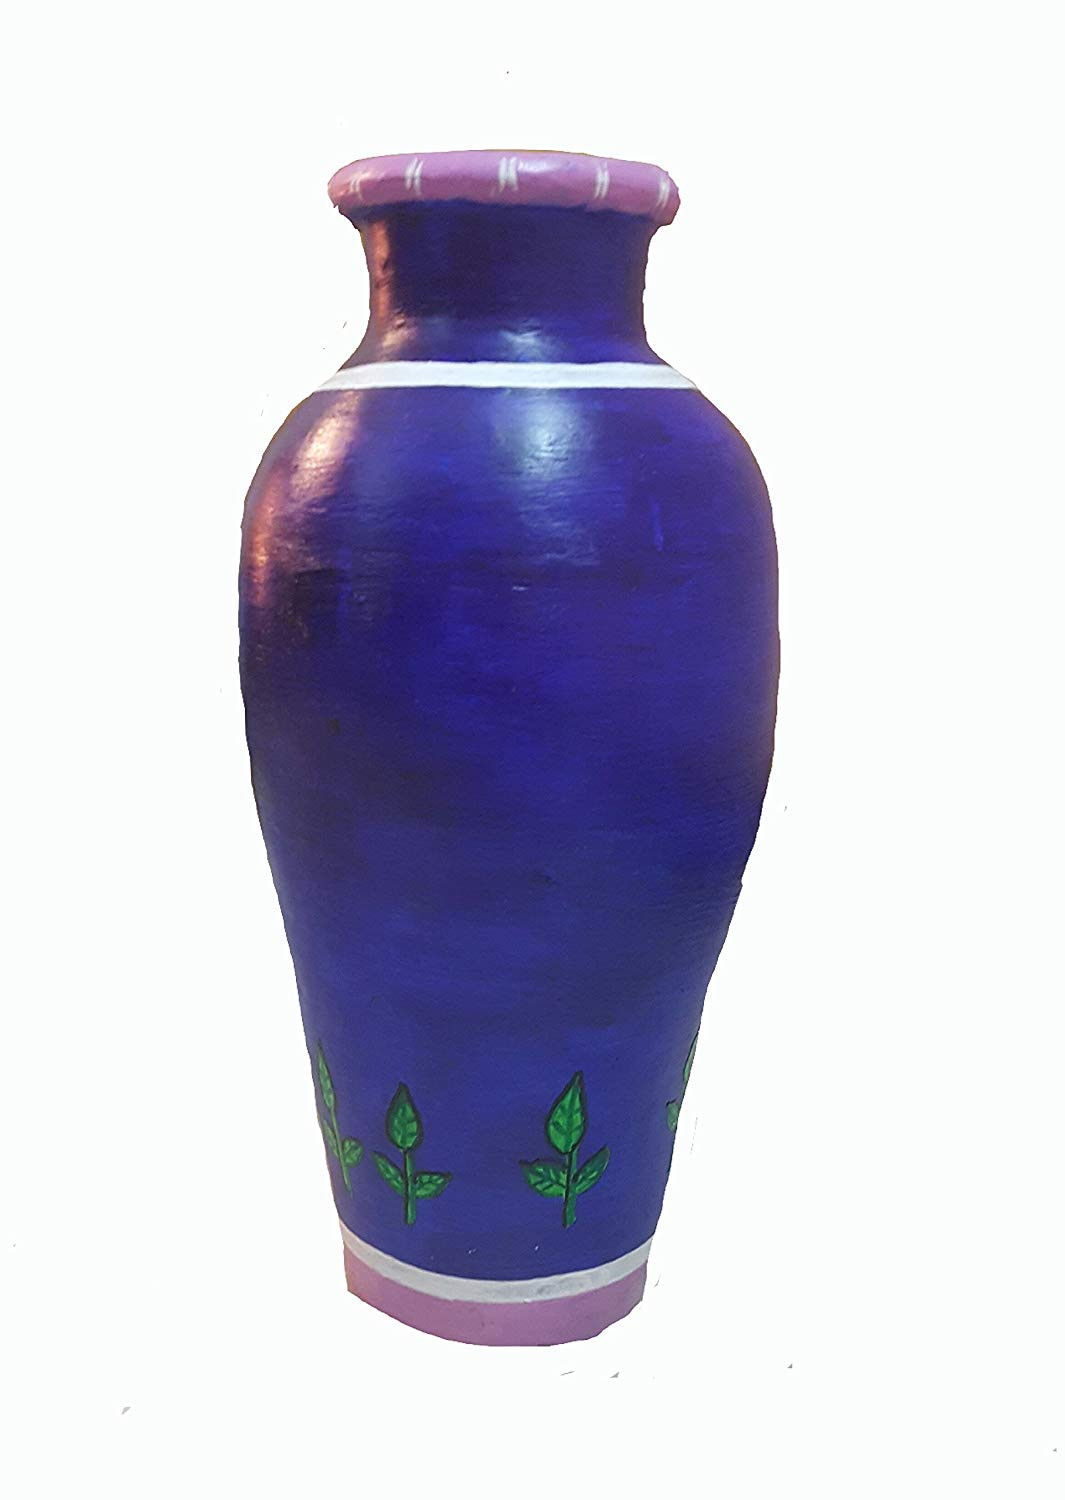 10 Fashionable Vintage Pink Ceramic Vase 2024 free download vintage pink ceramic vase of buy shree fine arts butterfly hand painted terracotta vase large throughout buy shree fine arts butterfly hand painted terracotta vase large online at low prices